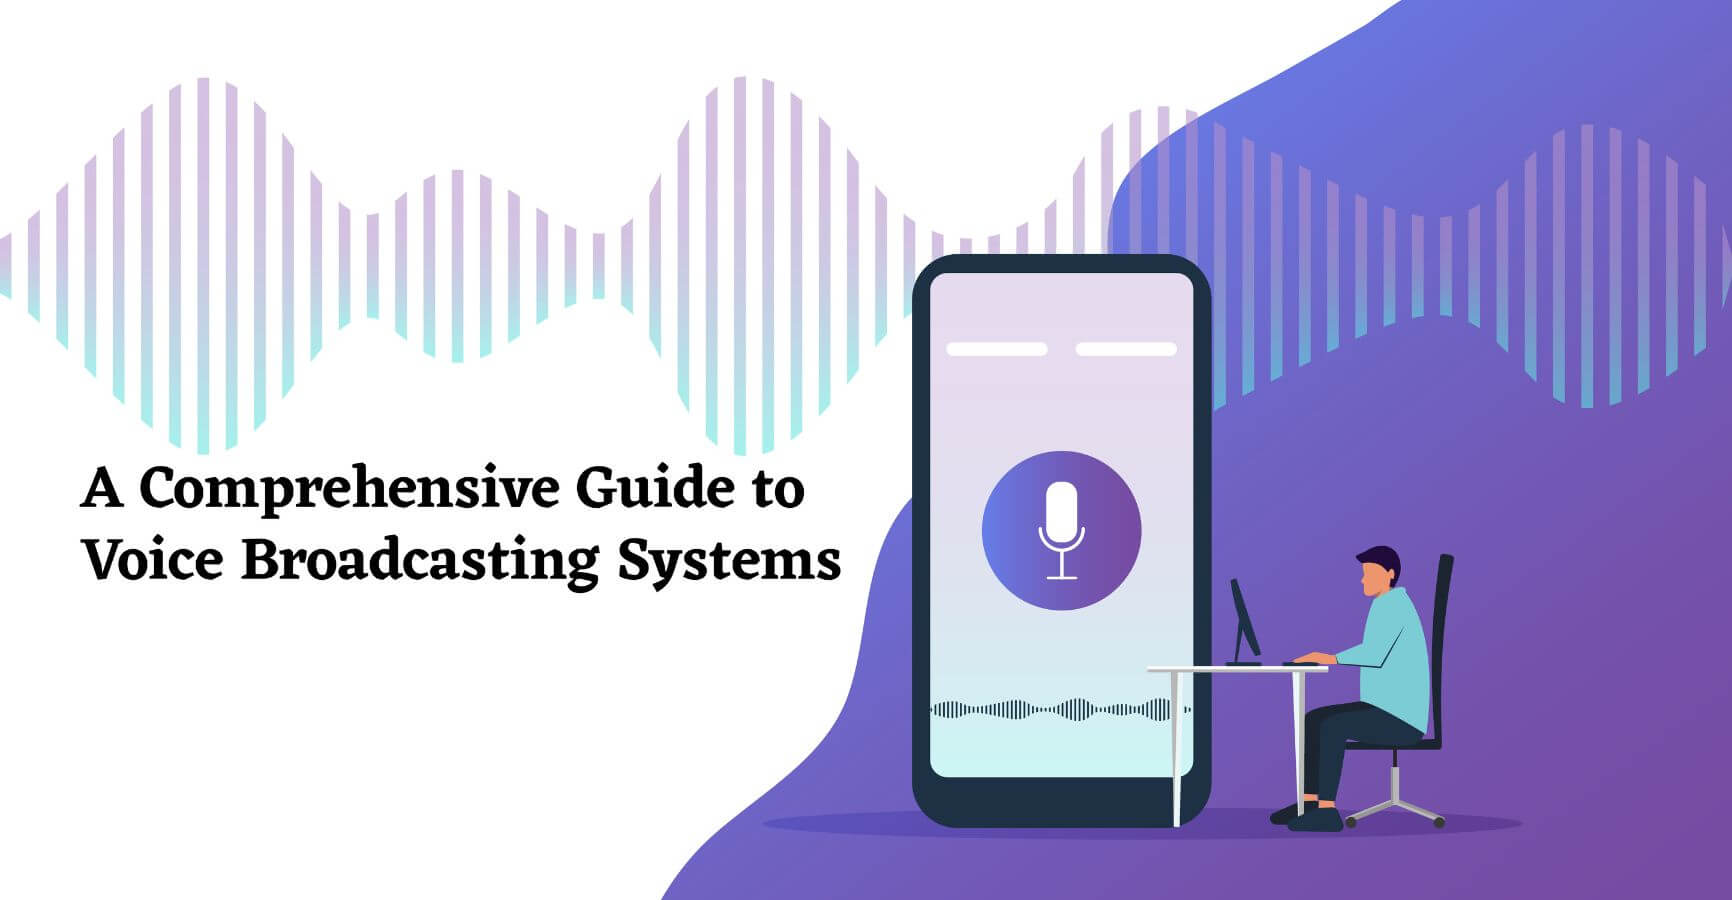 A Comprehensive Guide to Voice Broadcasting Systems